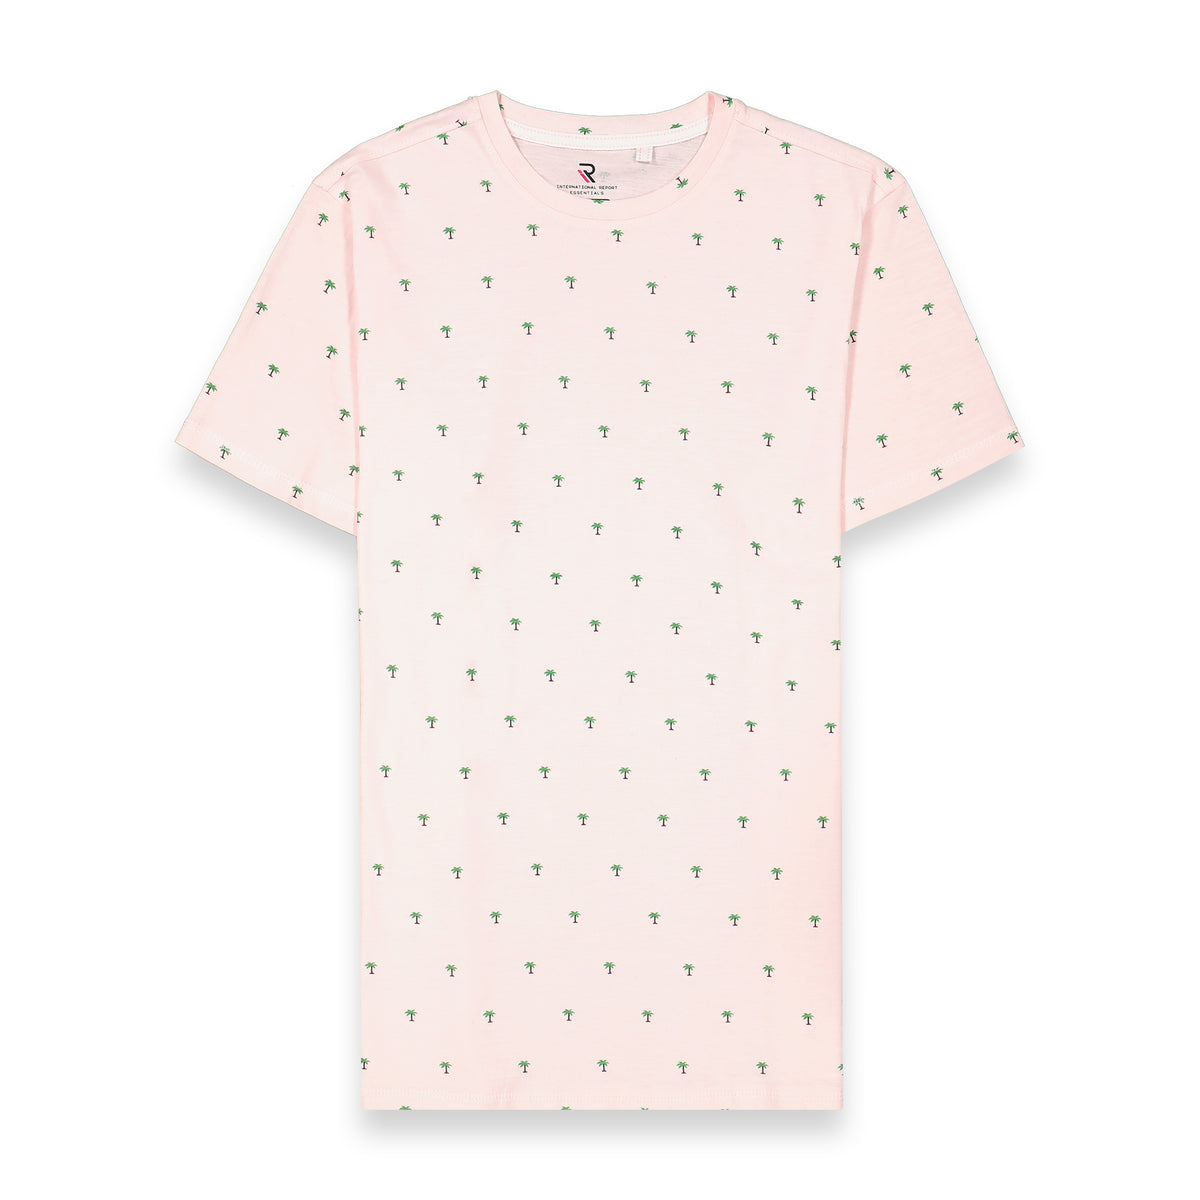 Front View of Short Sleeve Shirt with Palm Tree Print in Pink